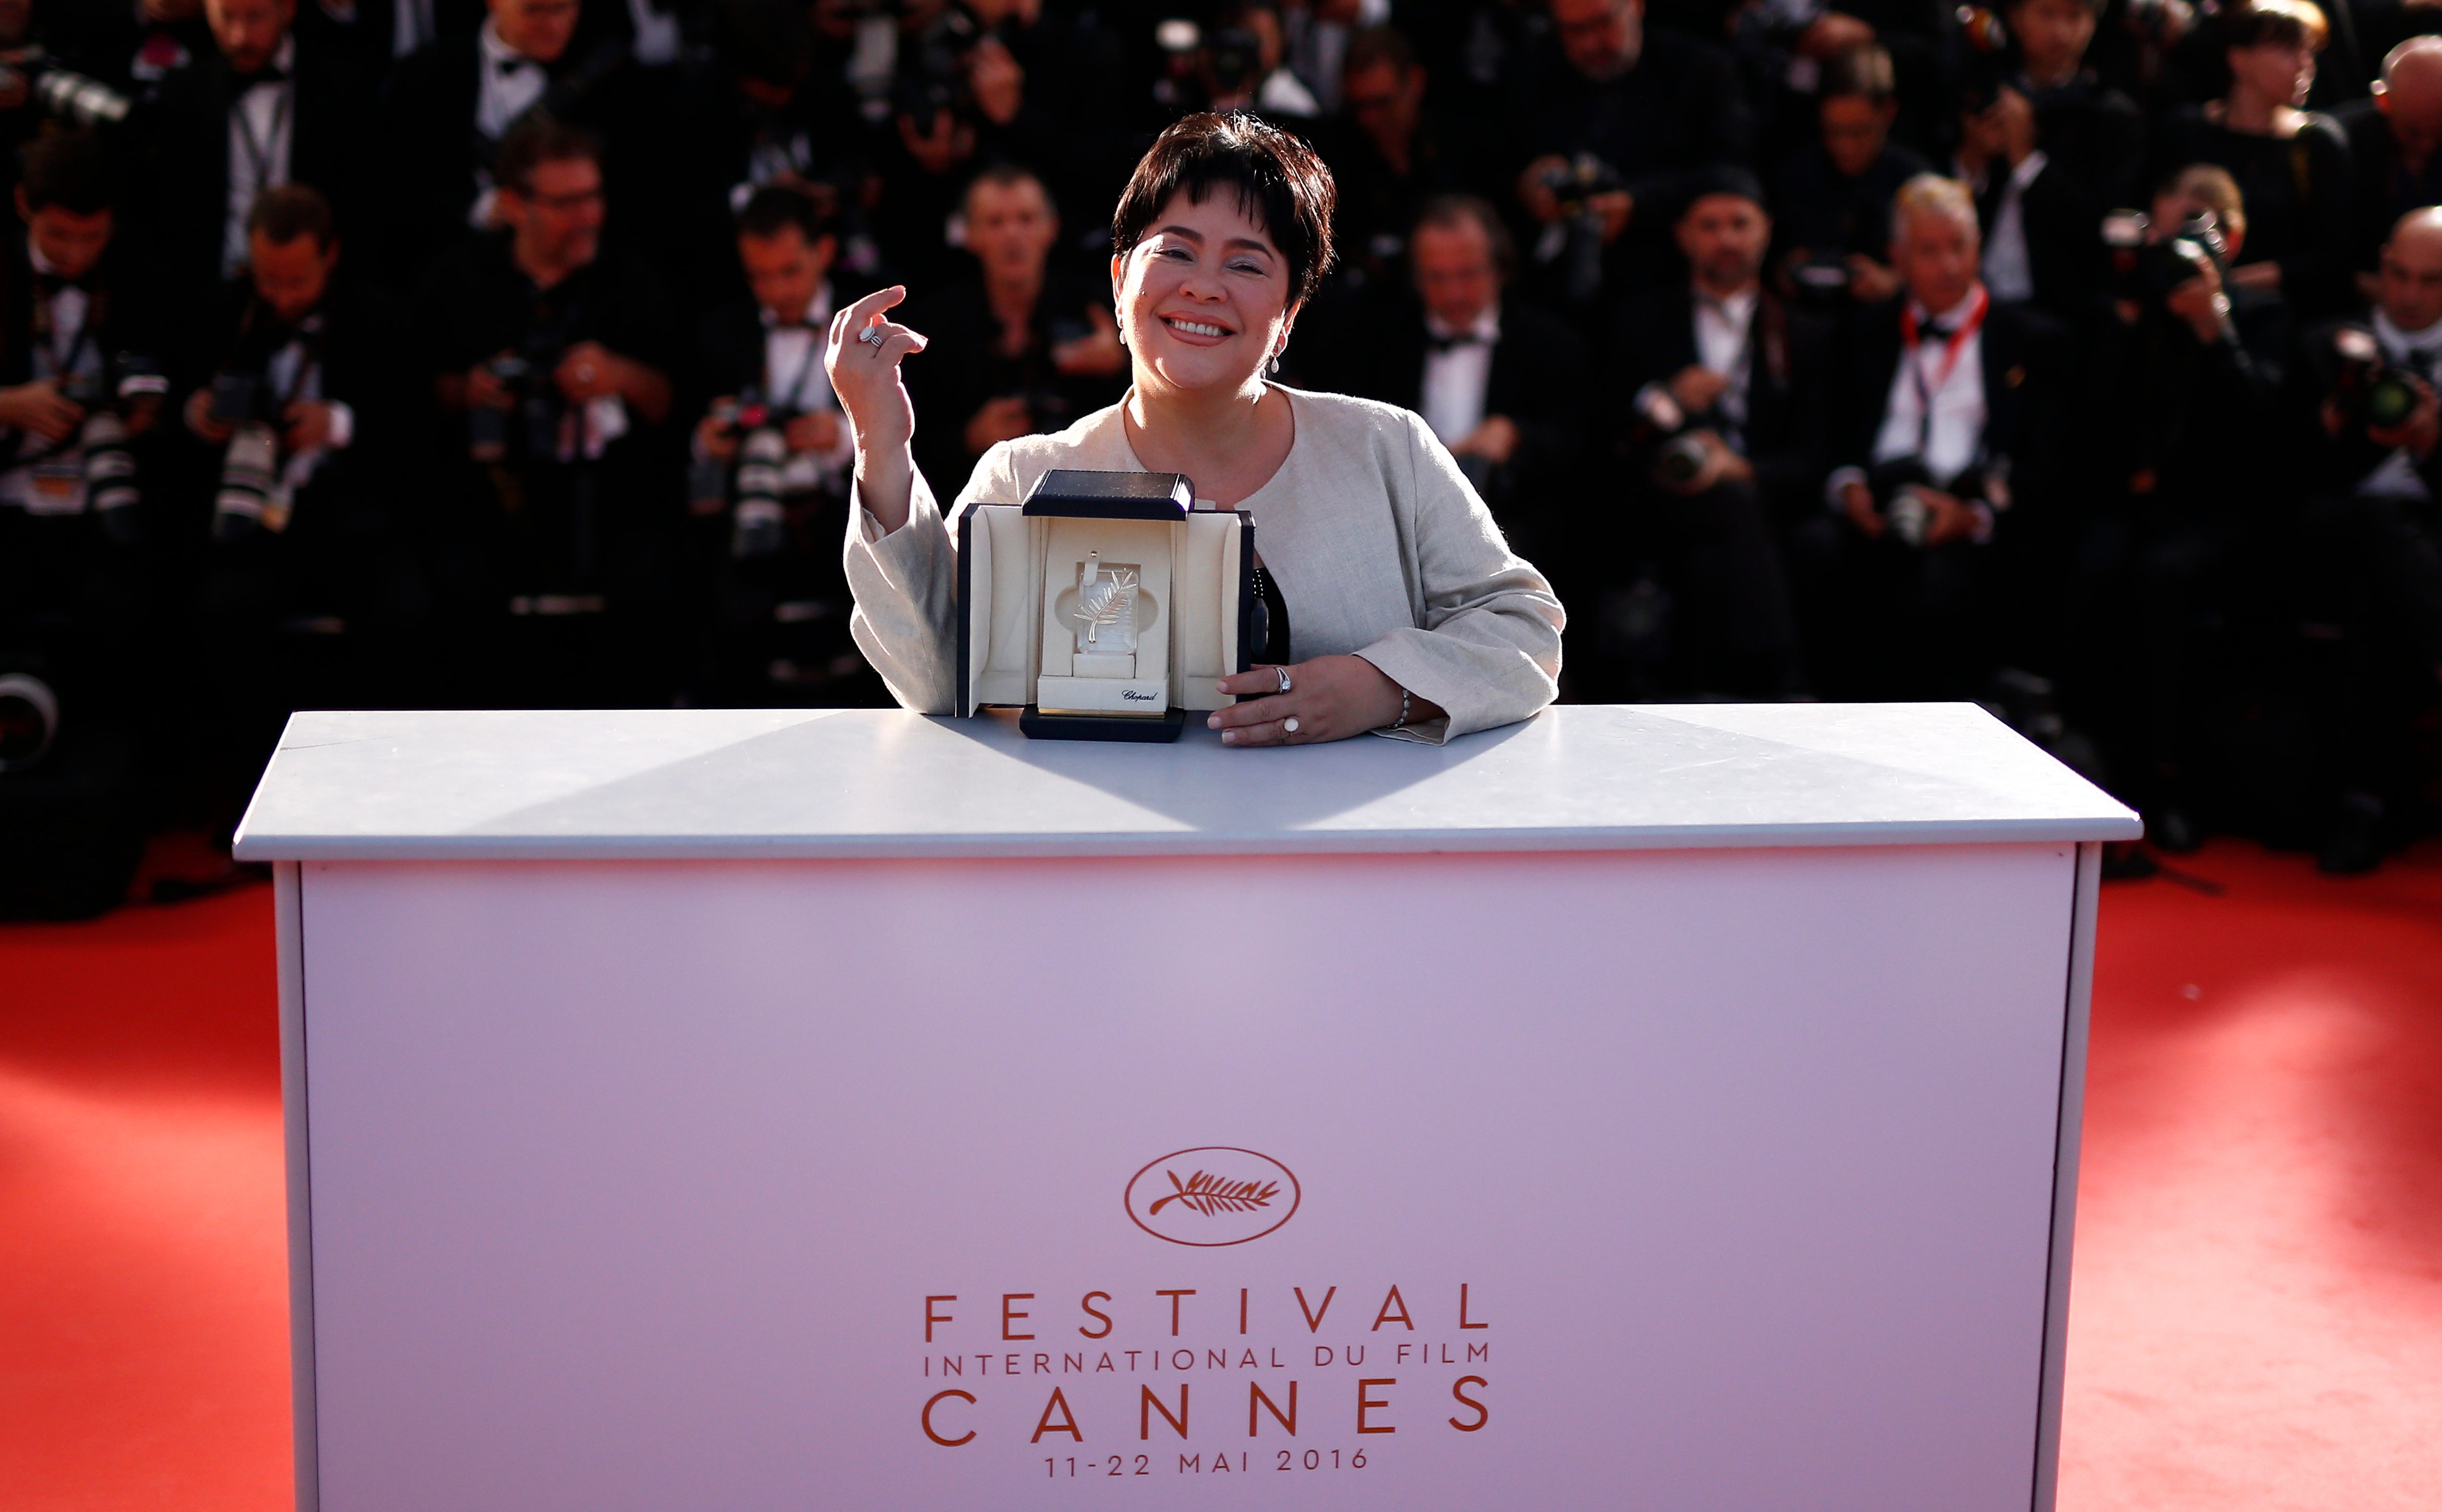 SHINING MOMENT. Actress Jaclyn Jose poses with her Best Performance by an Actress award for 'Ma'Rosa' during the Award Winners photocall at the 69th annual Cannes Film Festival in Cannes, France on May 22. Photo by Eian Langsdon/EPA  